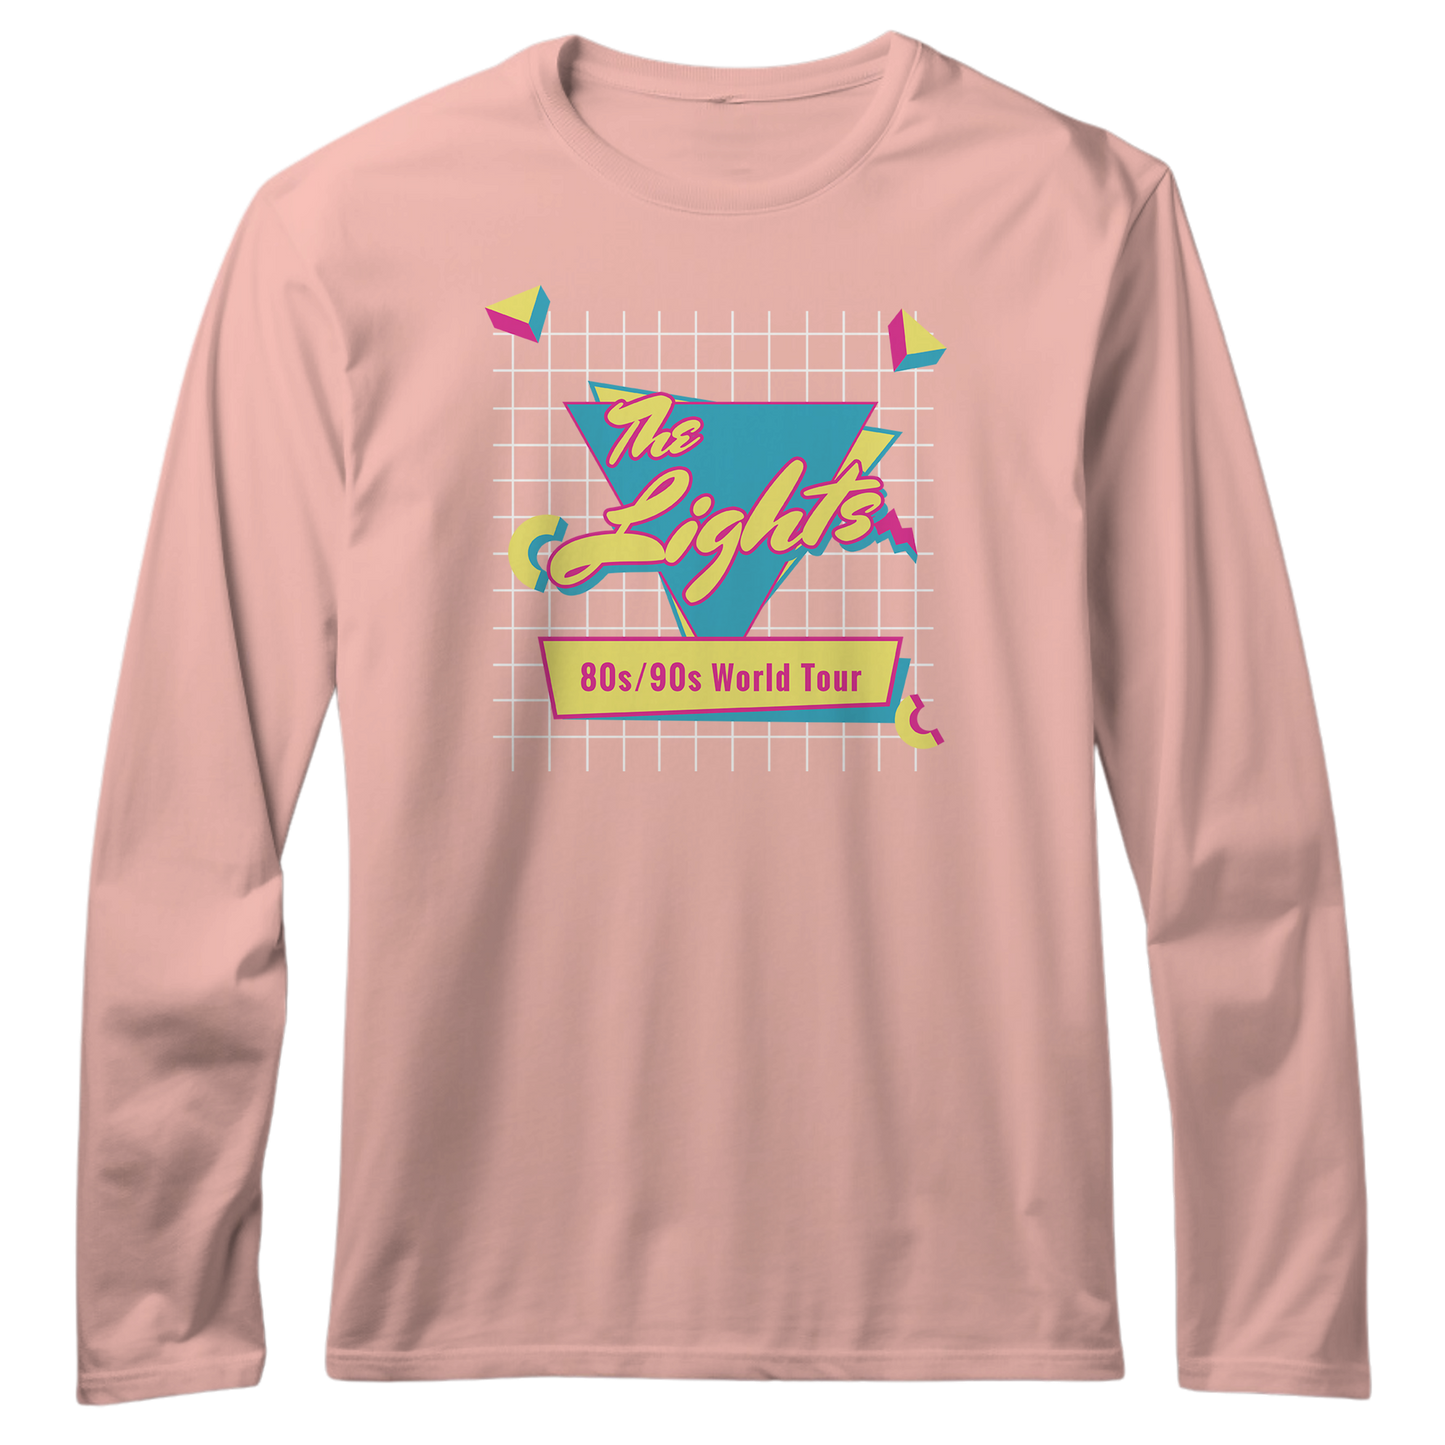 Lights Totally Awesome Long Sleeve Shirt - Light Pink